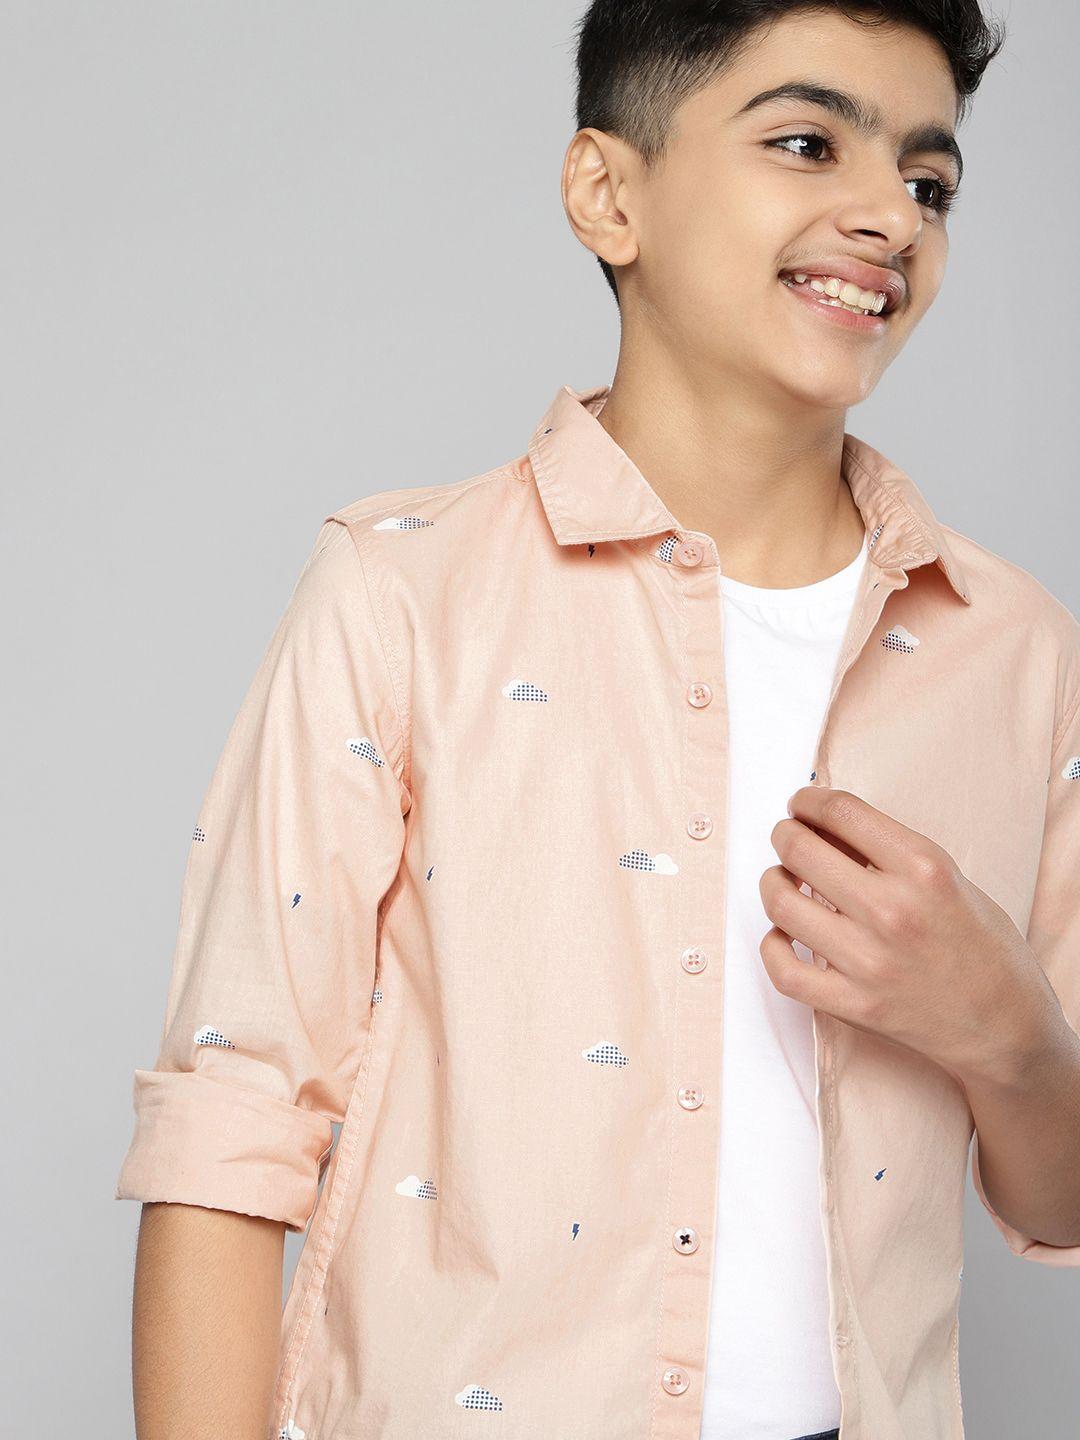 m&h juniors boys pink printed pure cotton casual shirt